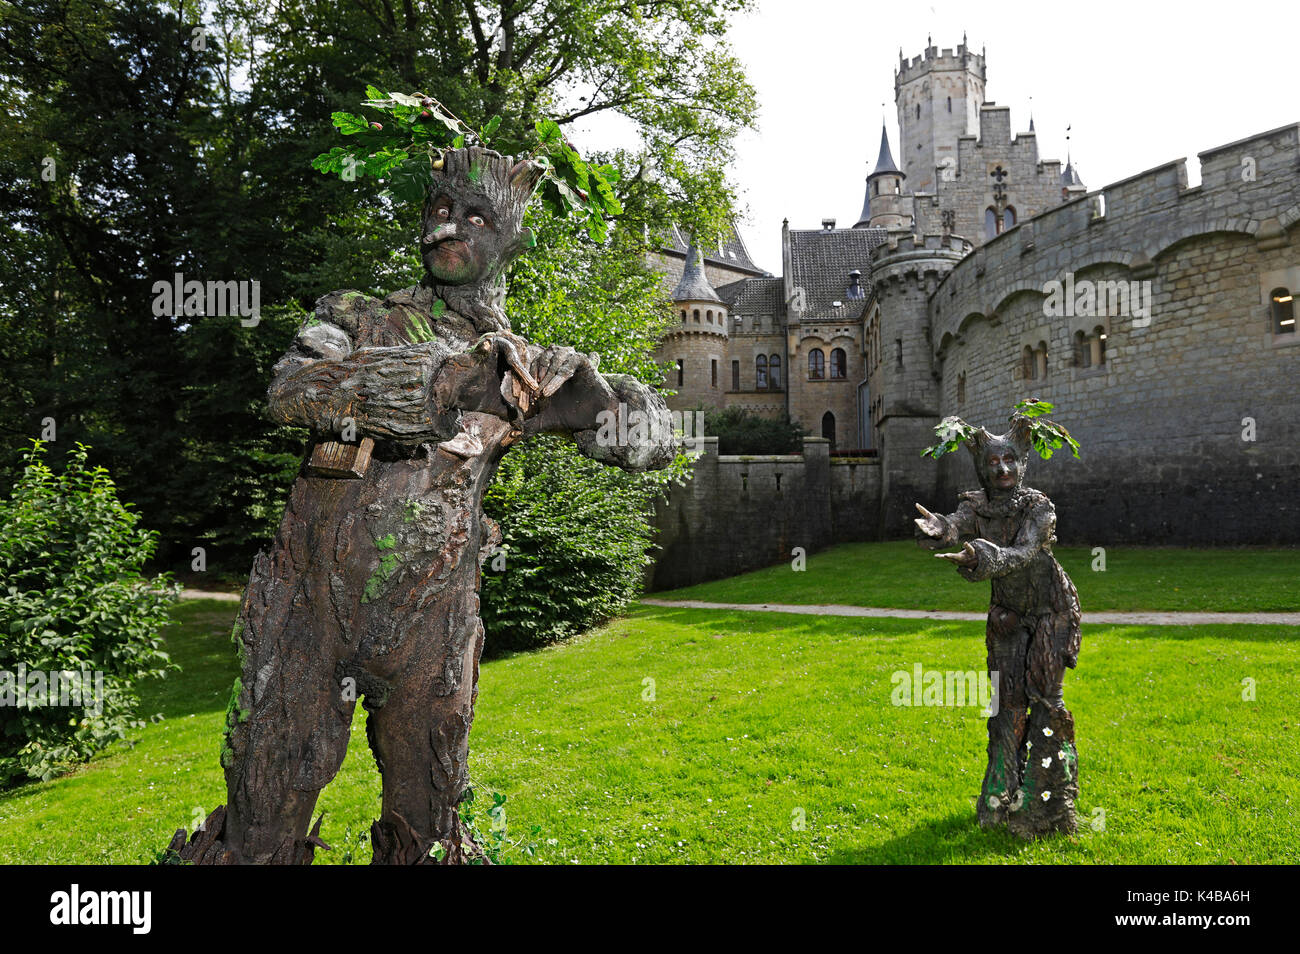 GEEK ART - Bodypainting meets SciFi, Fantasy and more: Fairytale photoshooting with model Maria and Enrico as tree-beings at the Marien Castle in Pattensen on August  30, 2017 - A project by the photographer Tschiponnique Skupin and the bodypainter and transformaker Enrico Lein Stock Photo